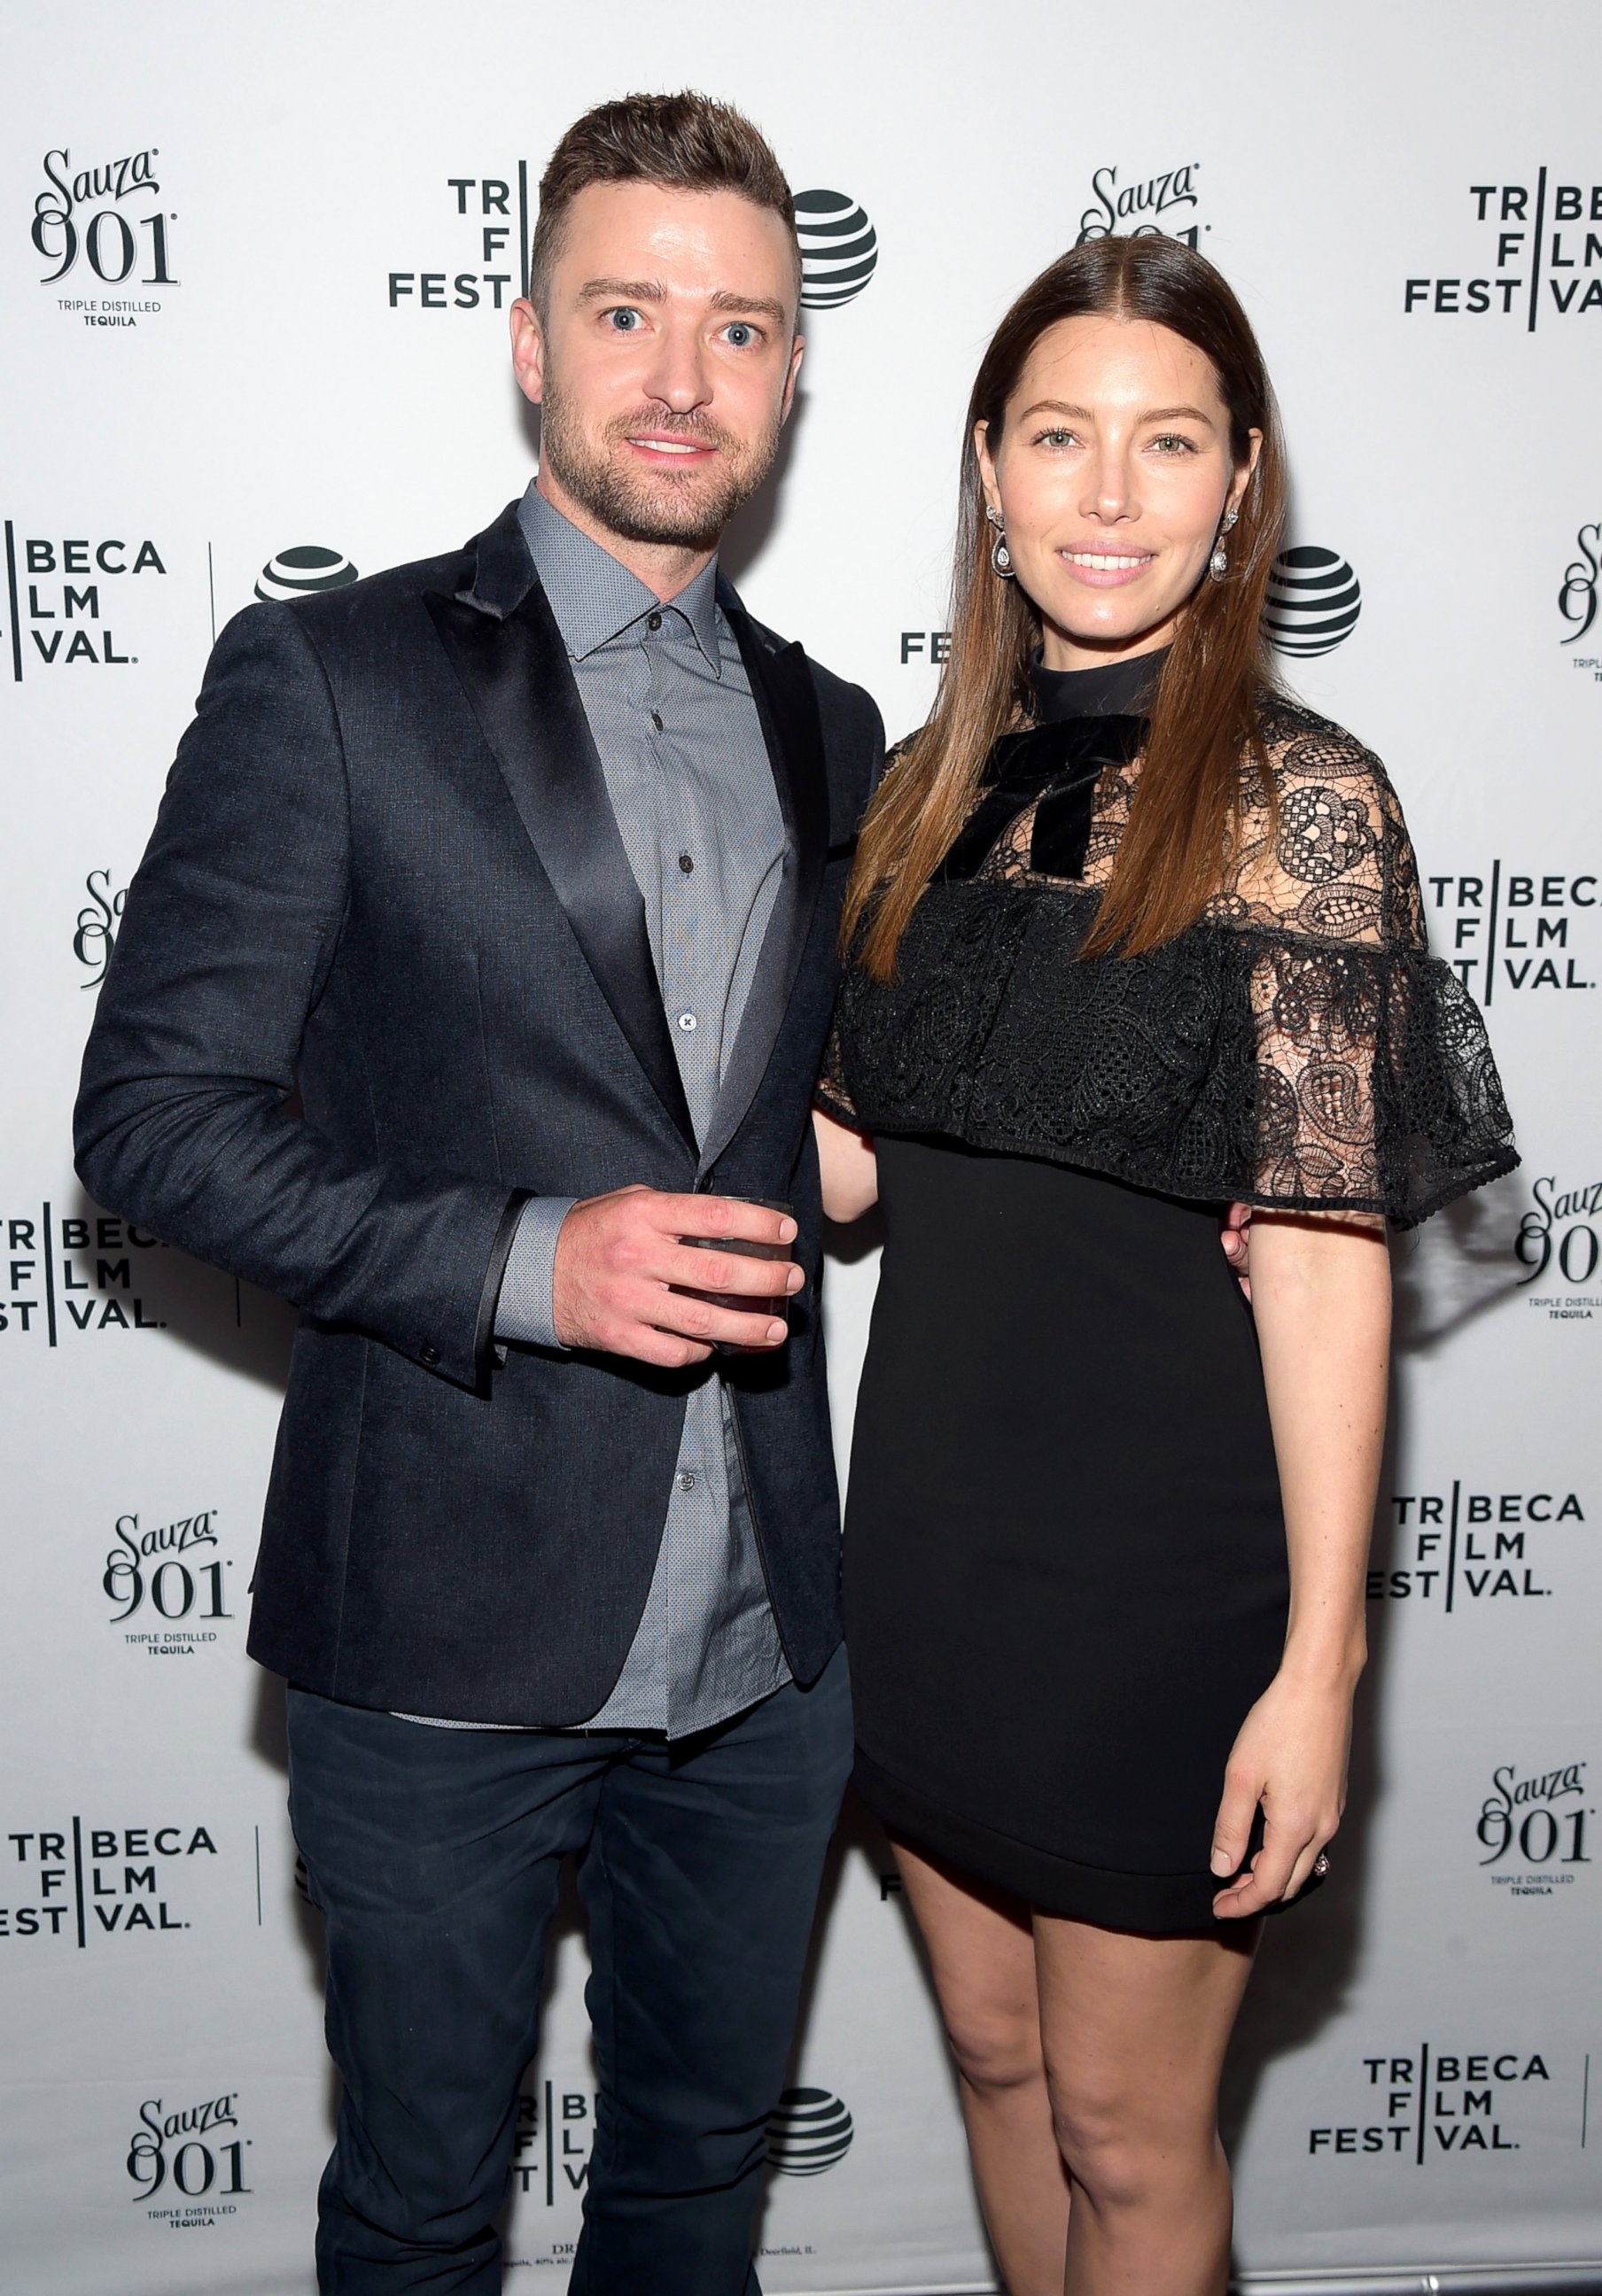 PHOTO: Justin Timberlake and Jessica Biel arrive at the Tribeca Film Festival "Devil and the Deep Blue Sea"screening, April 14, 2016, in New York City. 